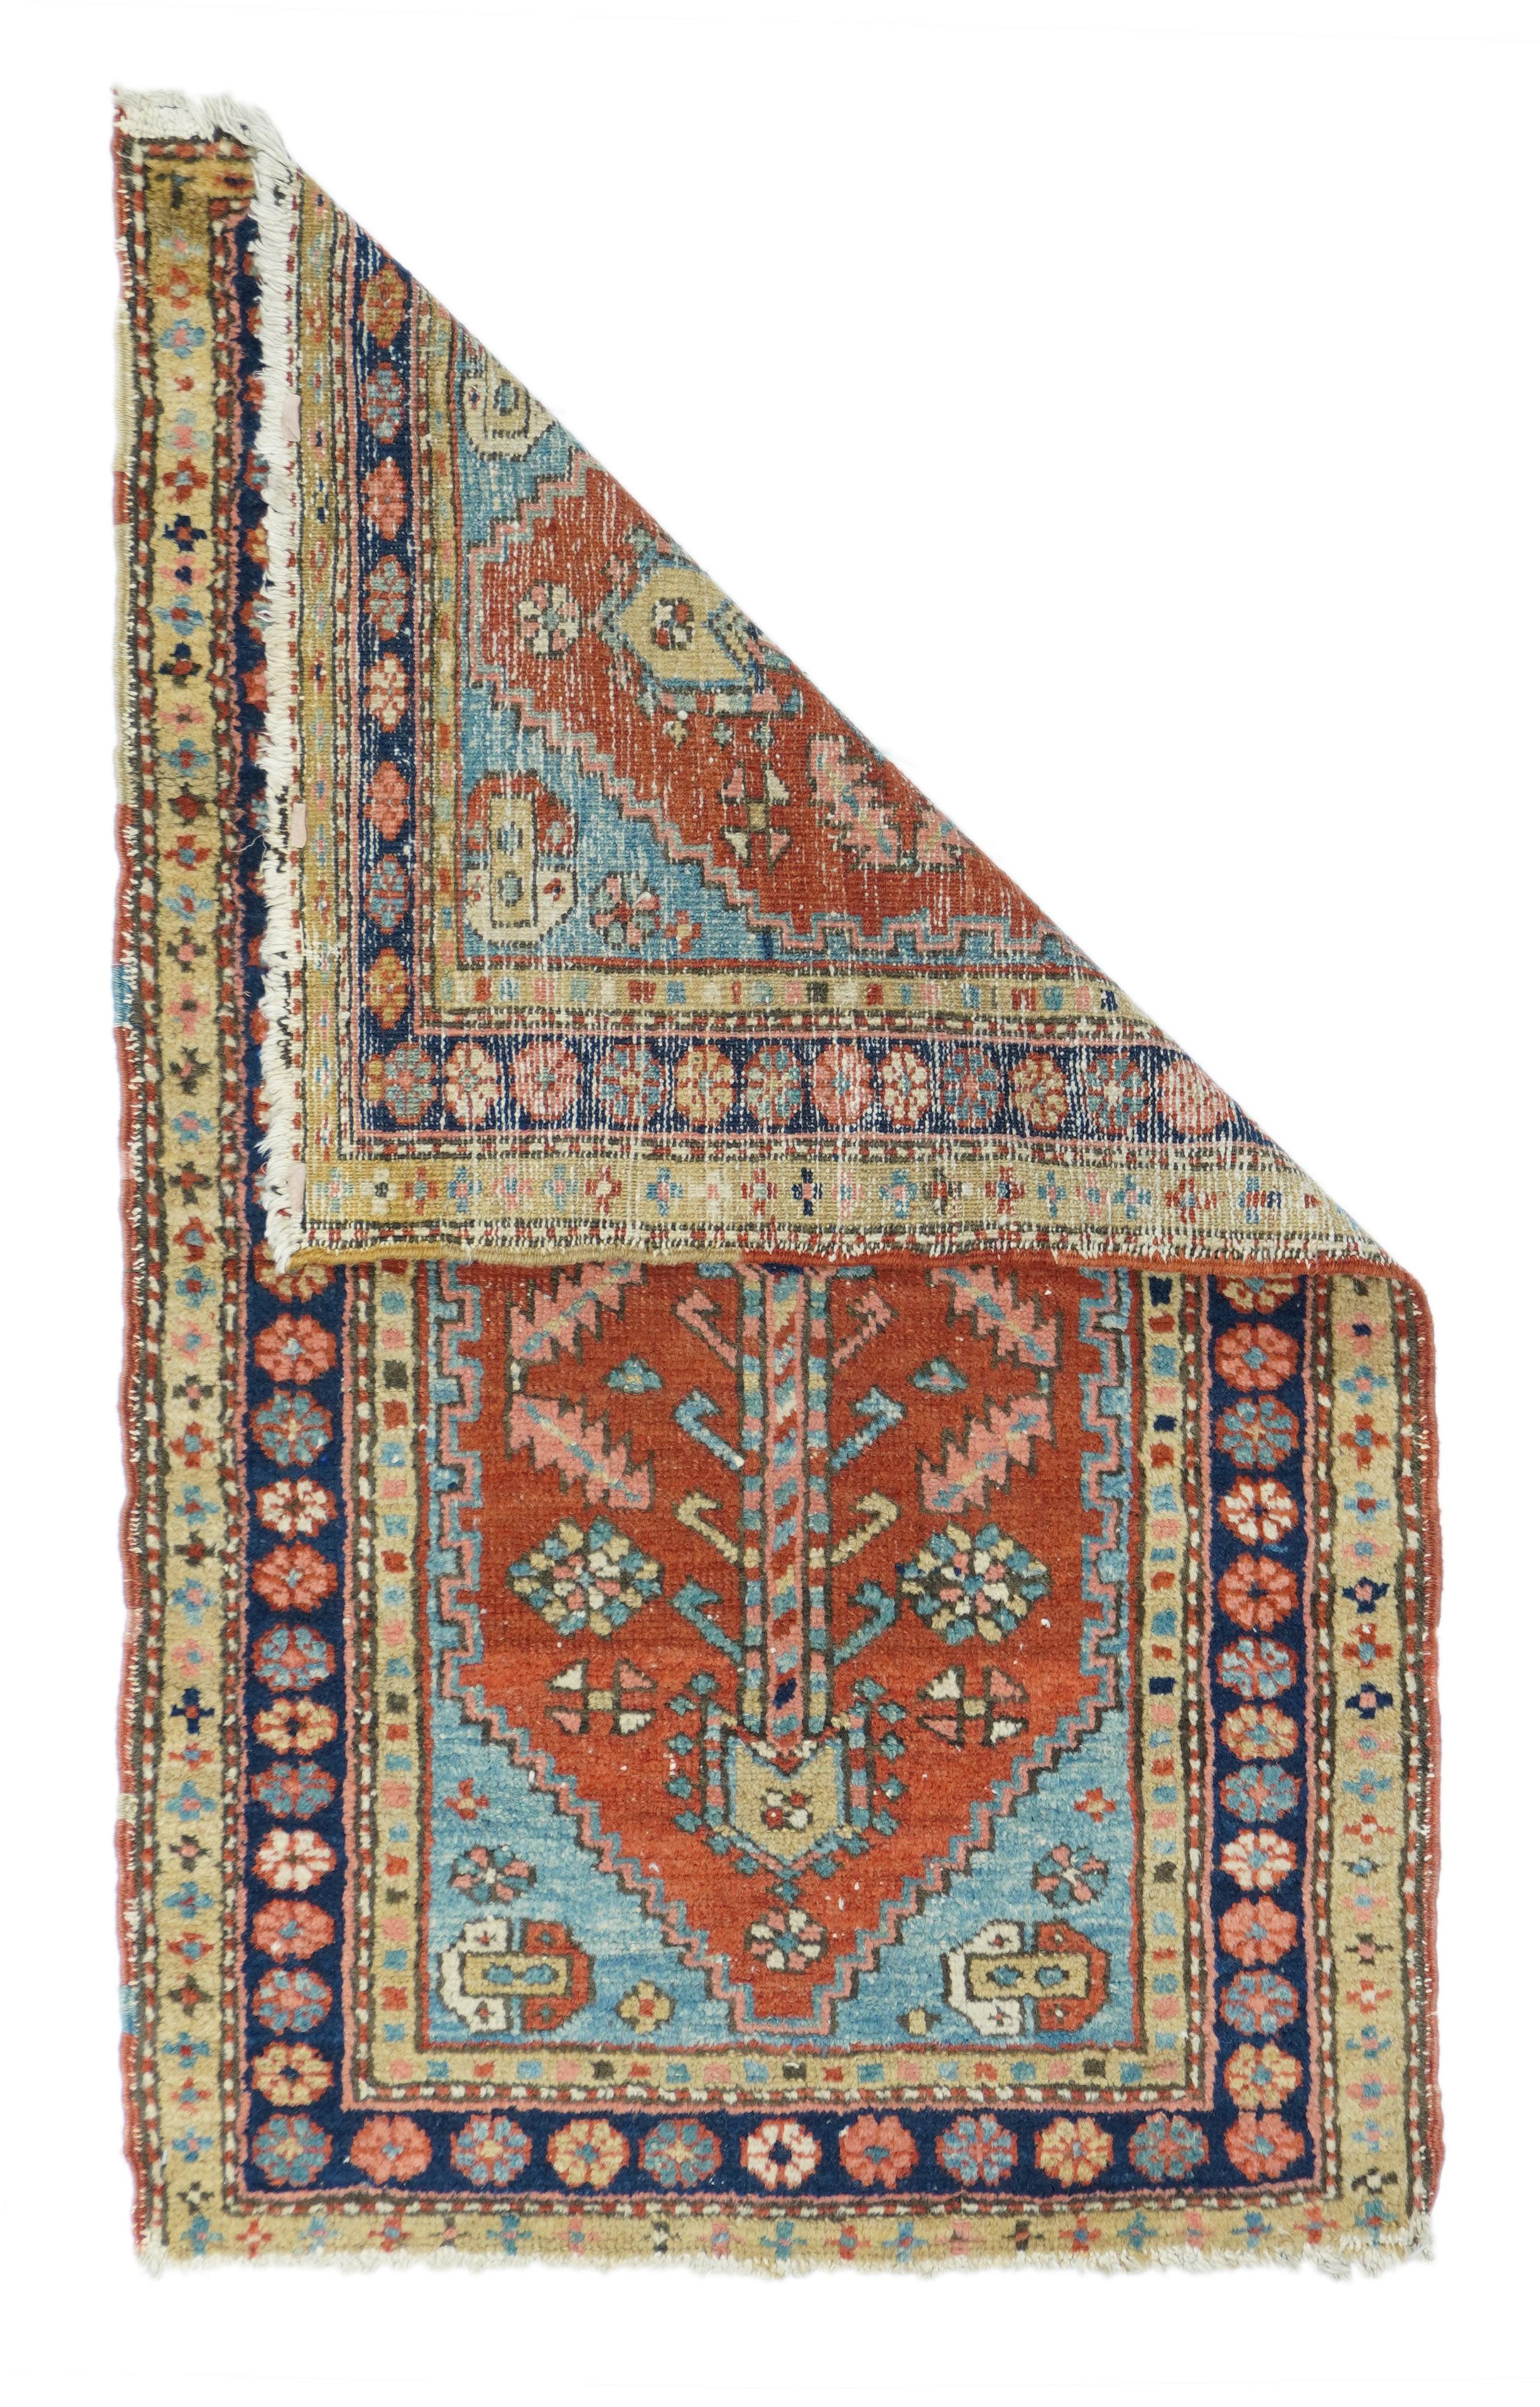 Antique Heriz Rug Measures : 2'6'' x 4'1''. The palette of larger Herizes is retained, but the pattern of this NW Persian village ruglet is switched to a small dark blue hexagon centre with four serrated leaves, and very long pendants. The madder